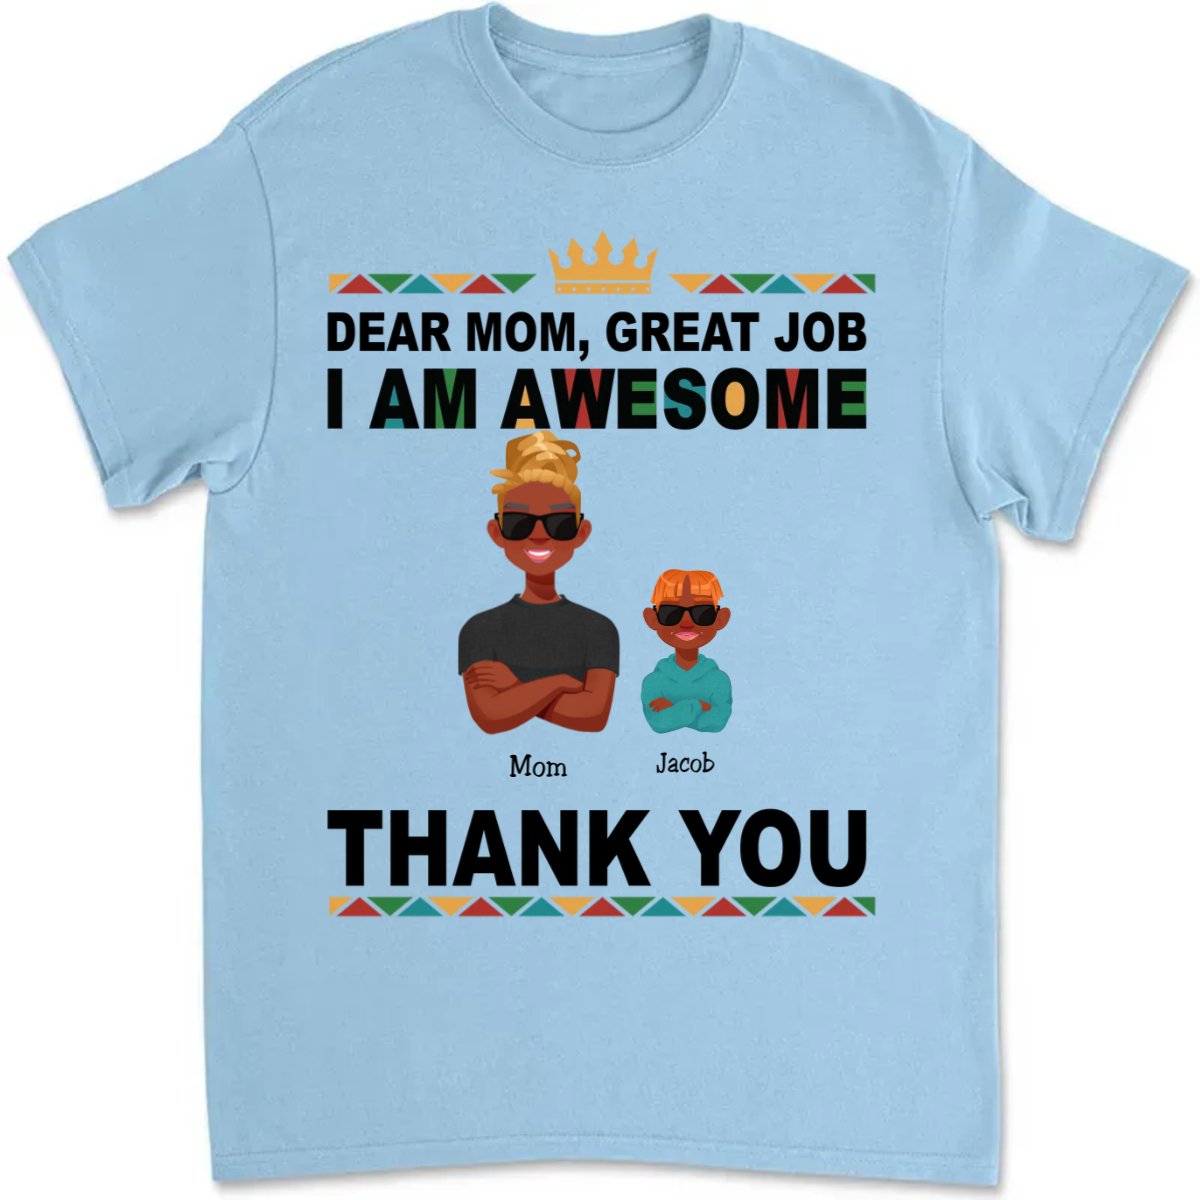 Family - Dear Mom, Great Job We're Awesome, Thank You - Personalized Unisex T - shirt - The Next Custom Gift